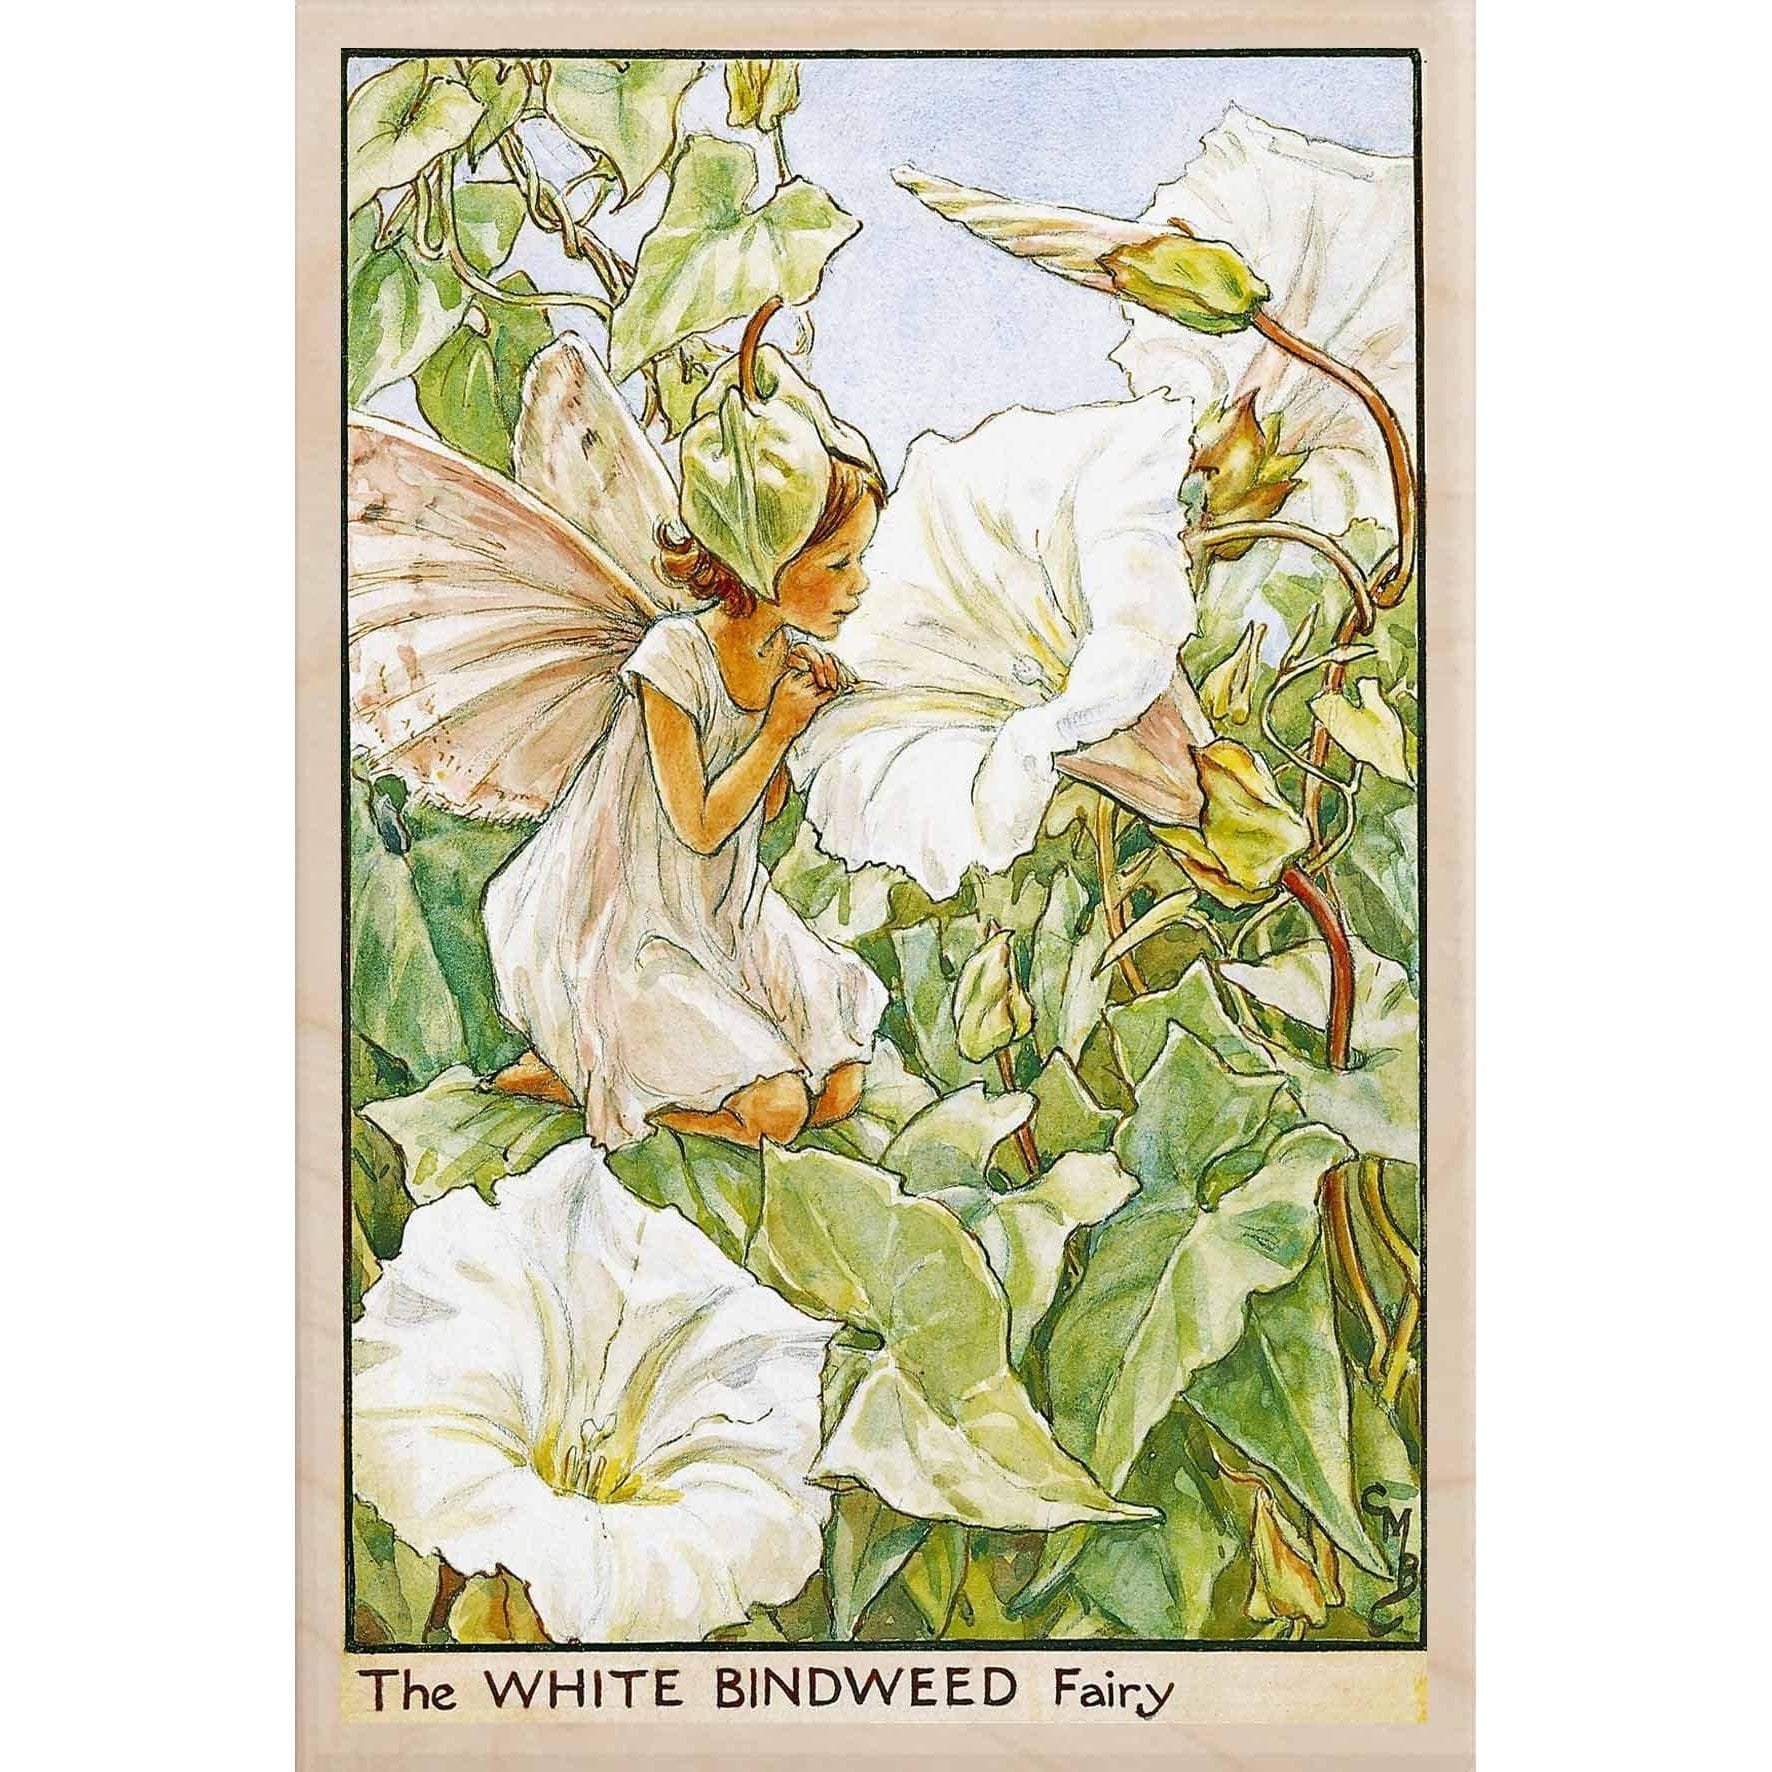 The Wooden Postcard Company Postcard White Bindweed Fairy Wooden Postcard (7069884088480)